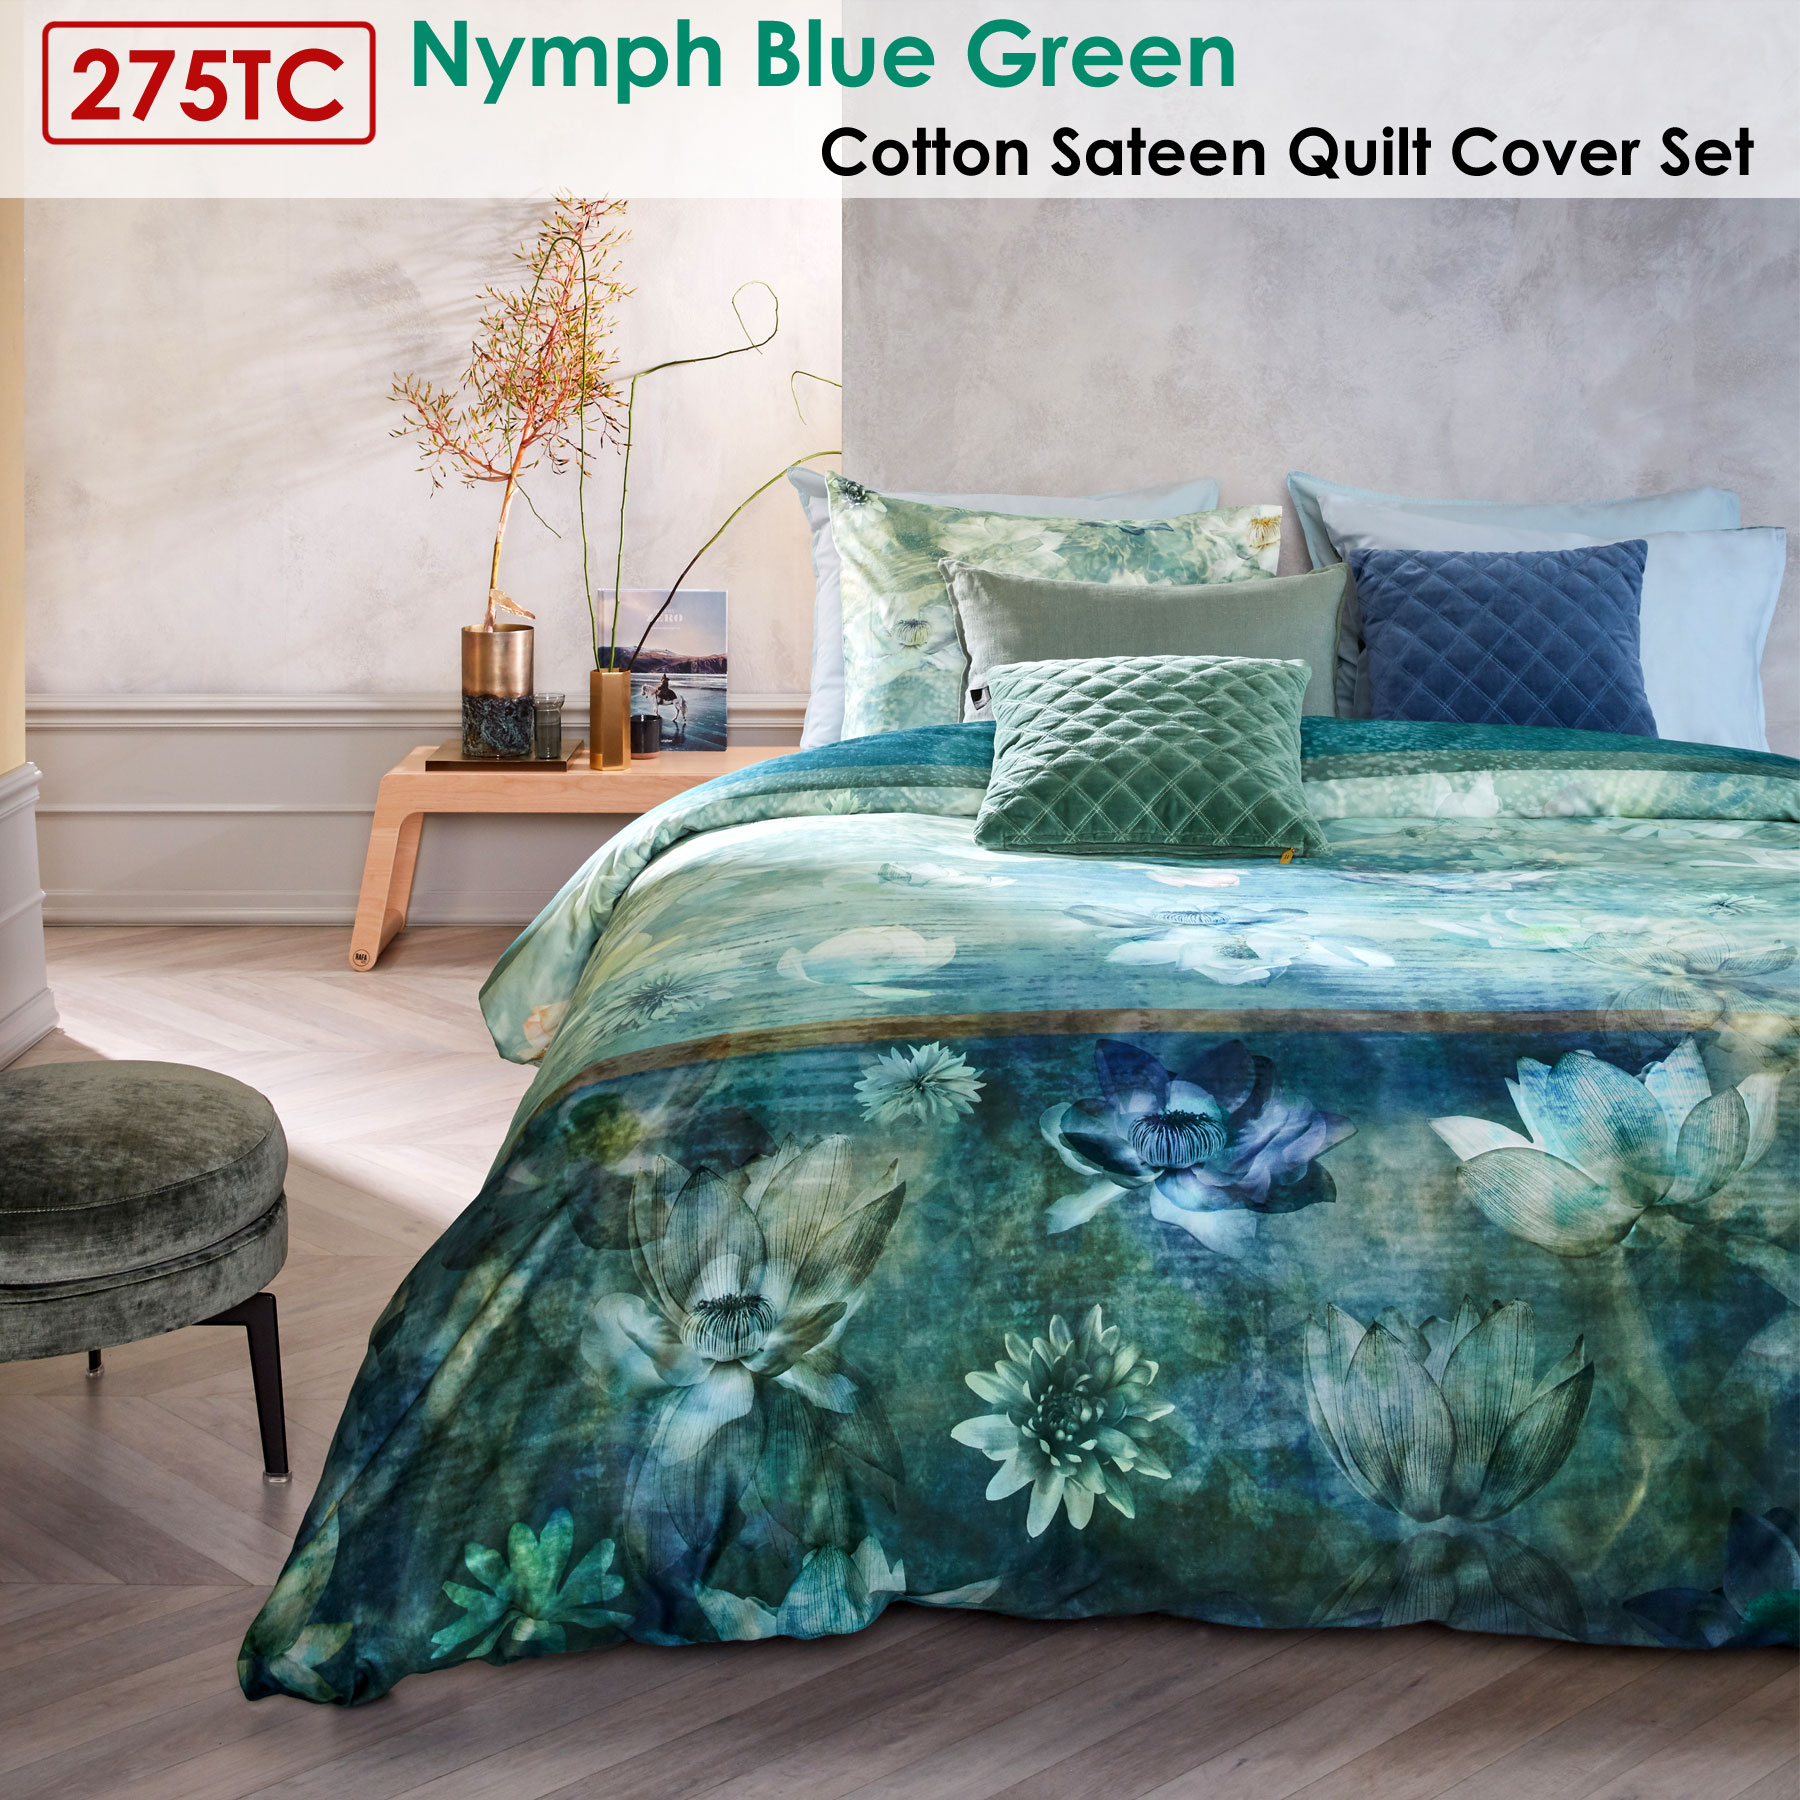 275tc Nymph Blue Green Cotton Sateen Quilt Cover Set By Auping